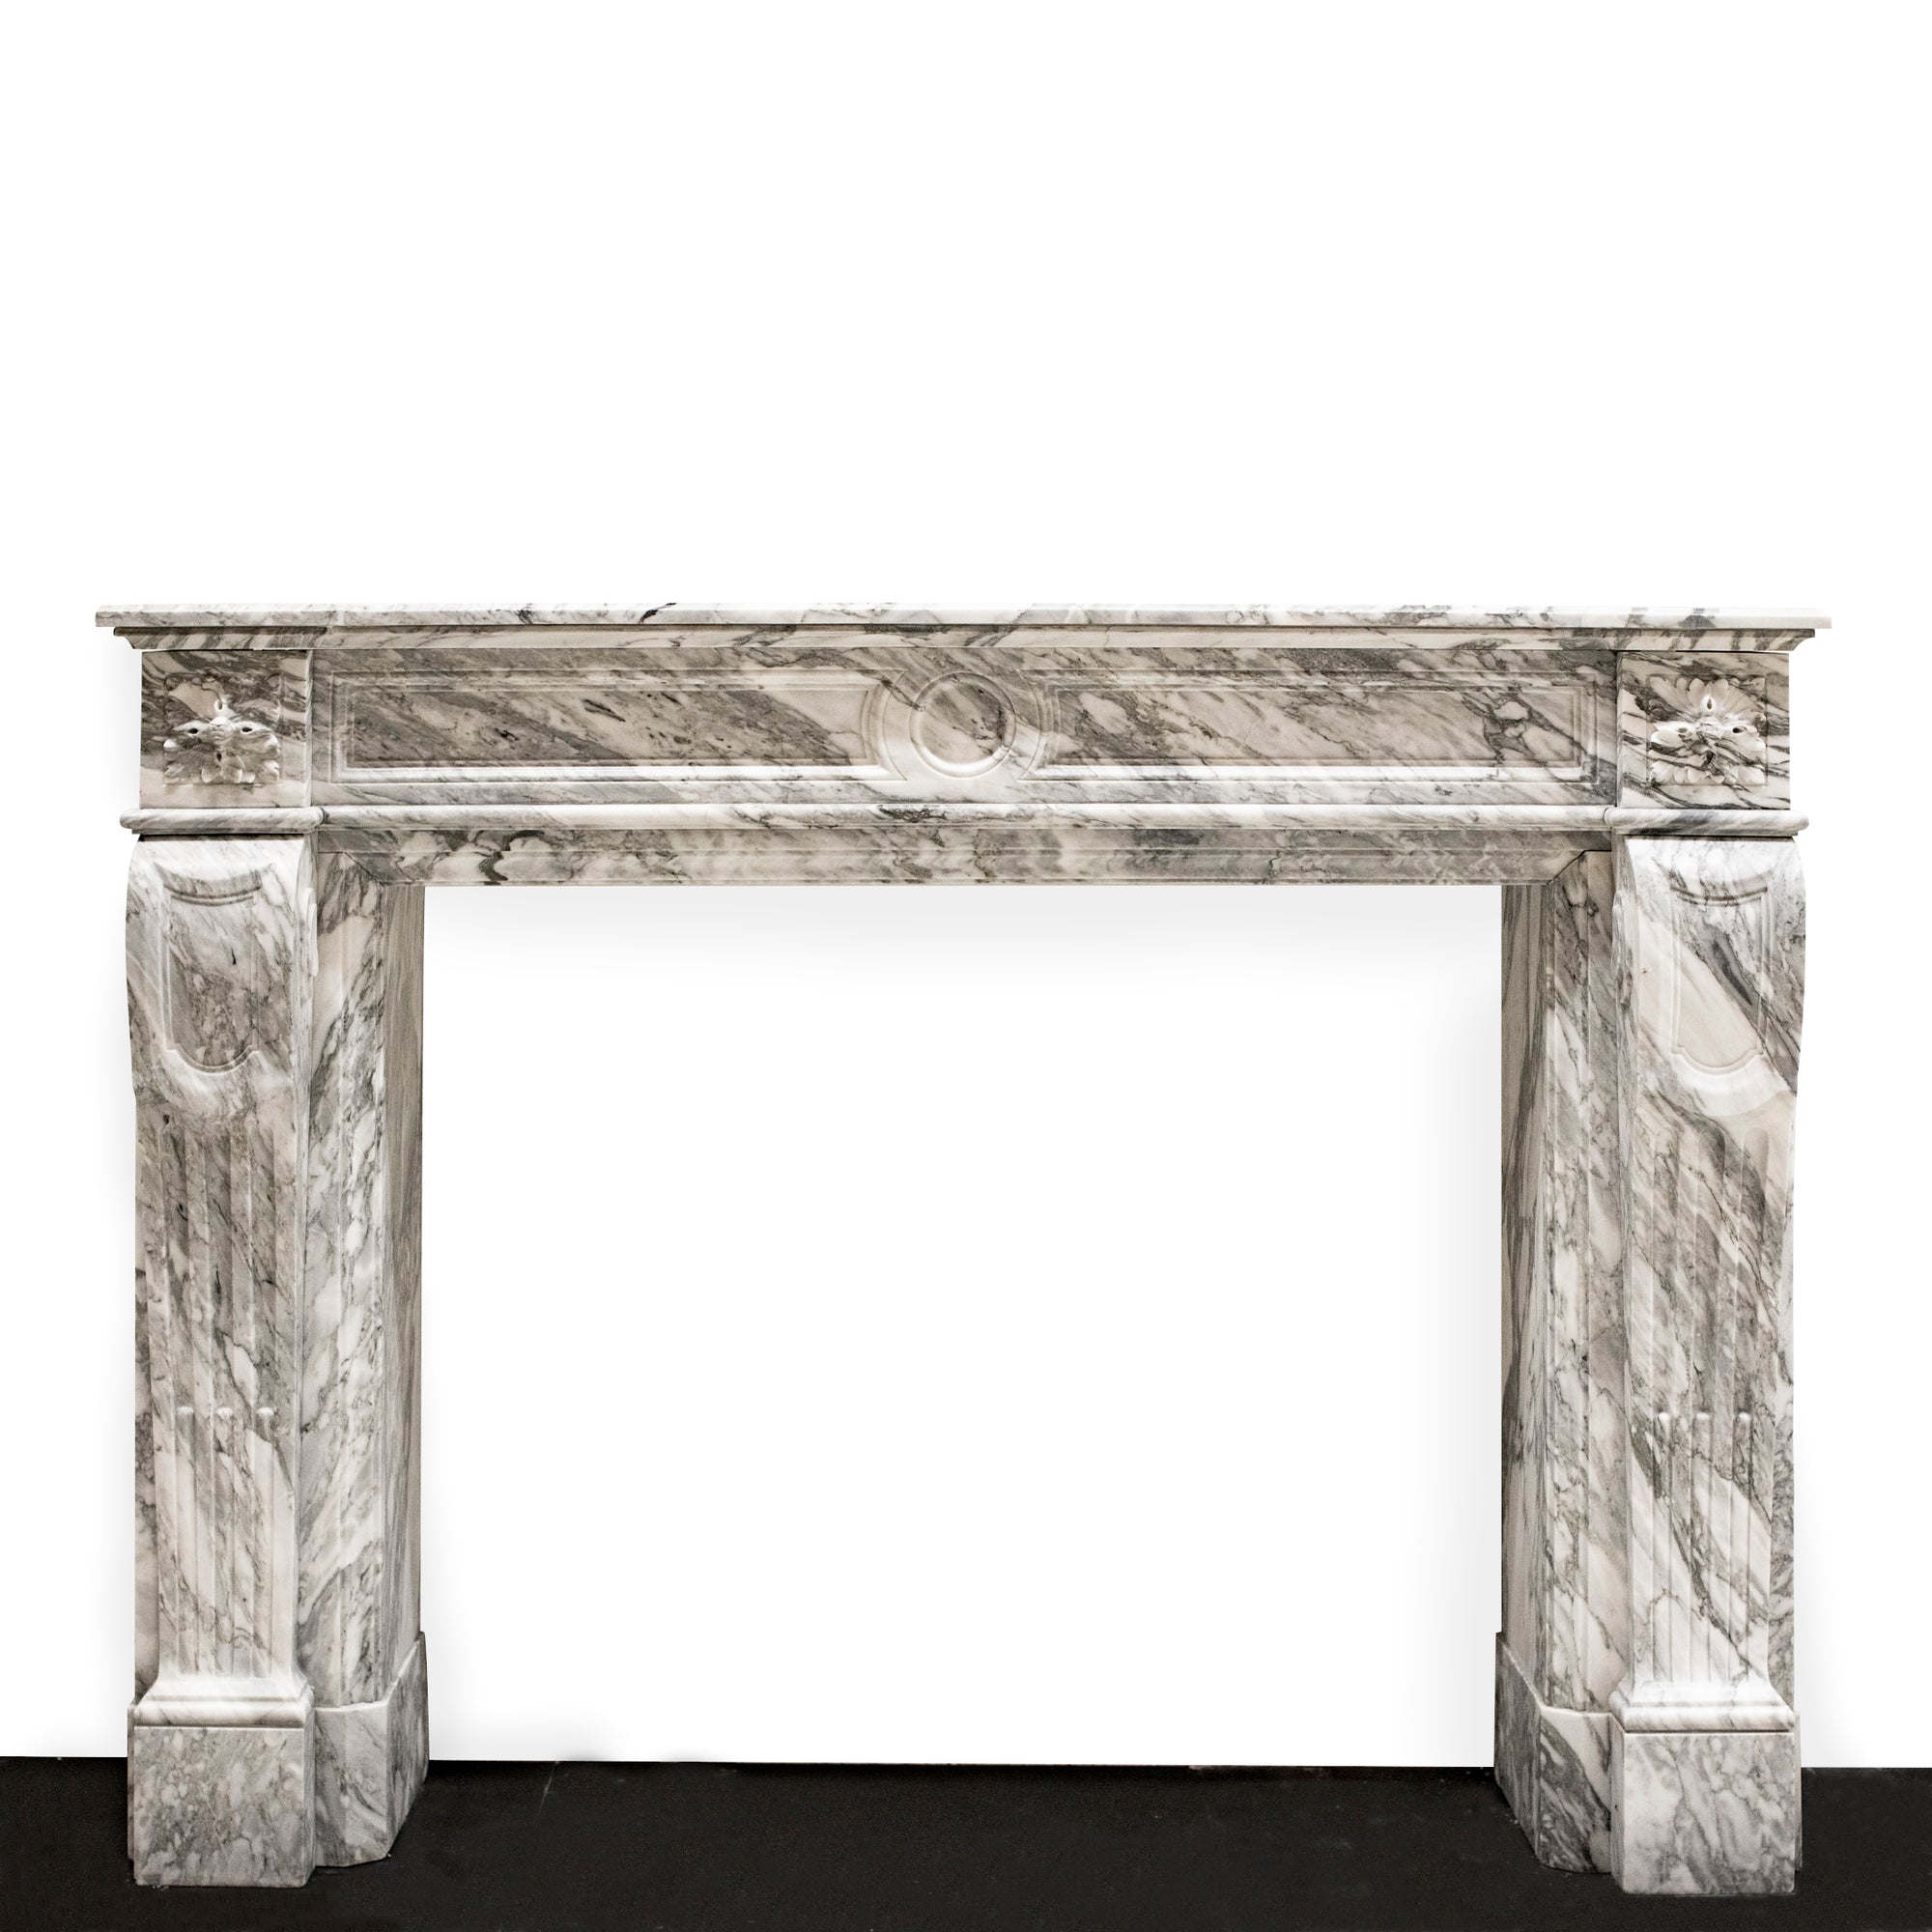 Antique Louis XVI Style Italian Arabescato Marble Fireplace | The Architectural Forum